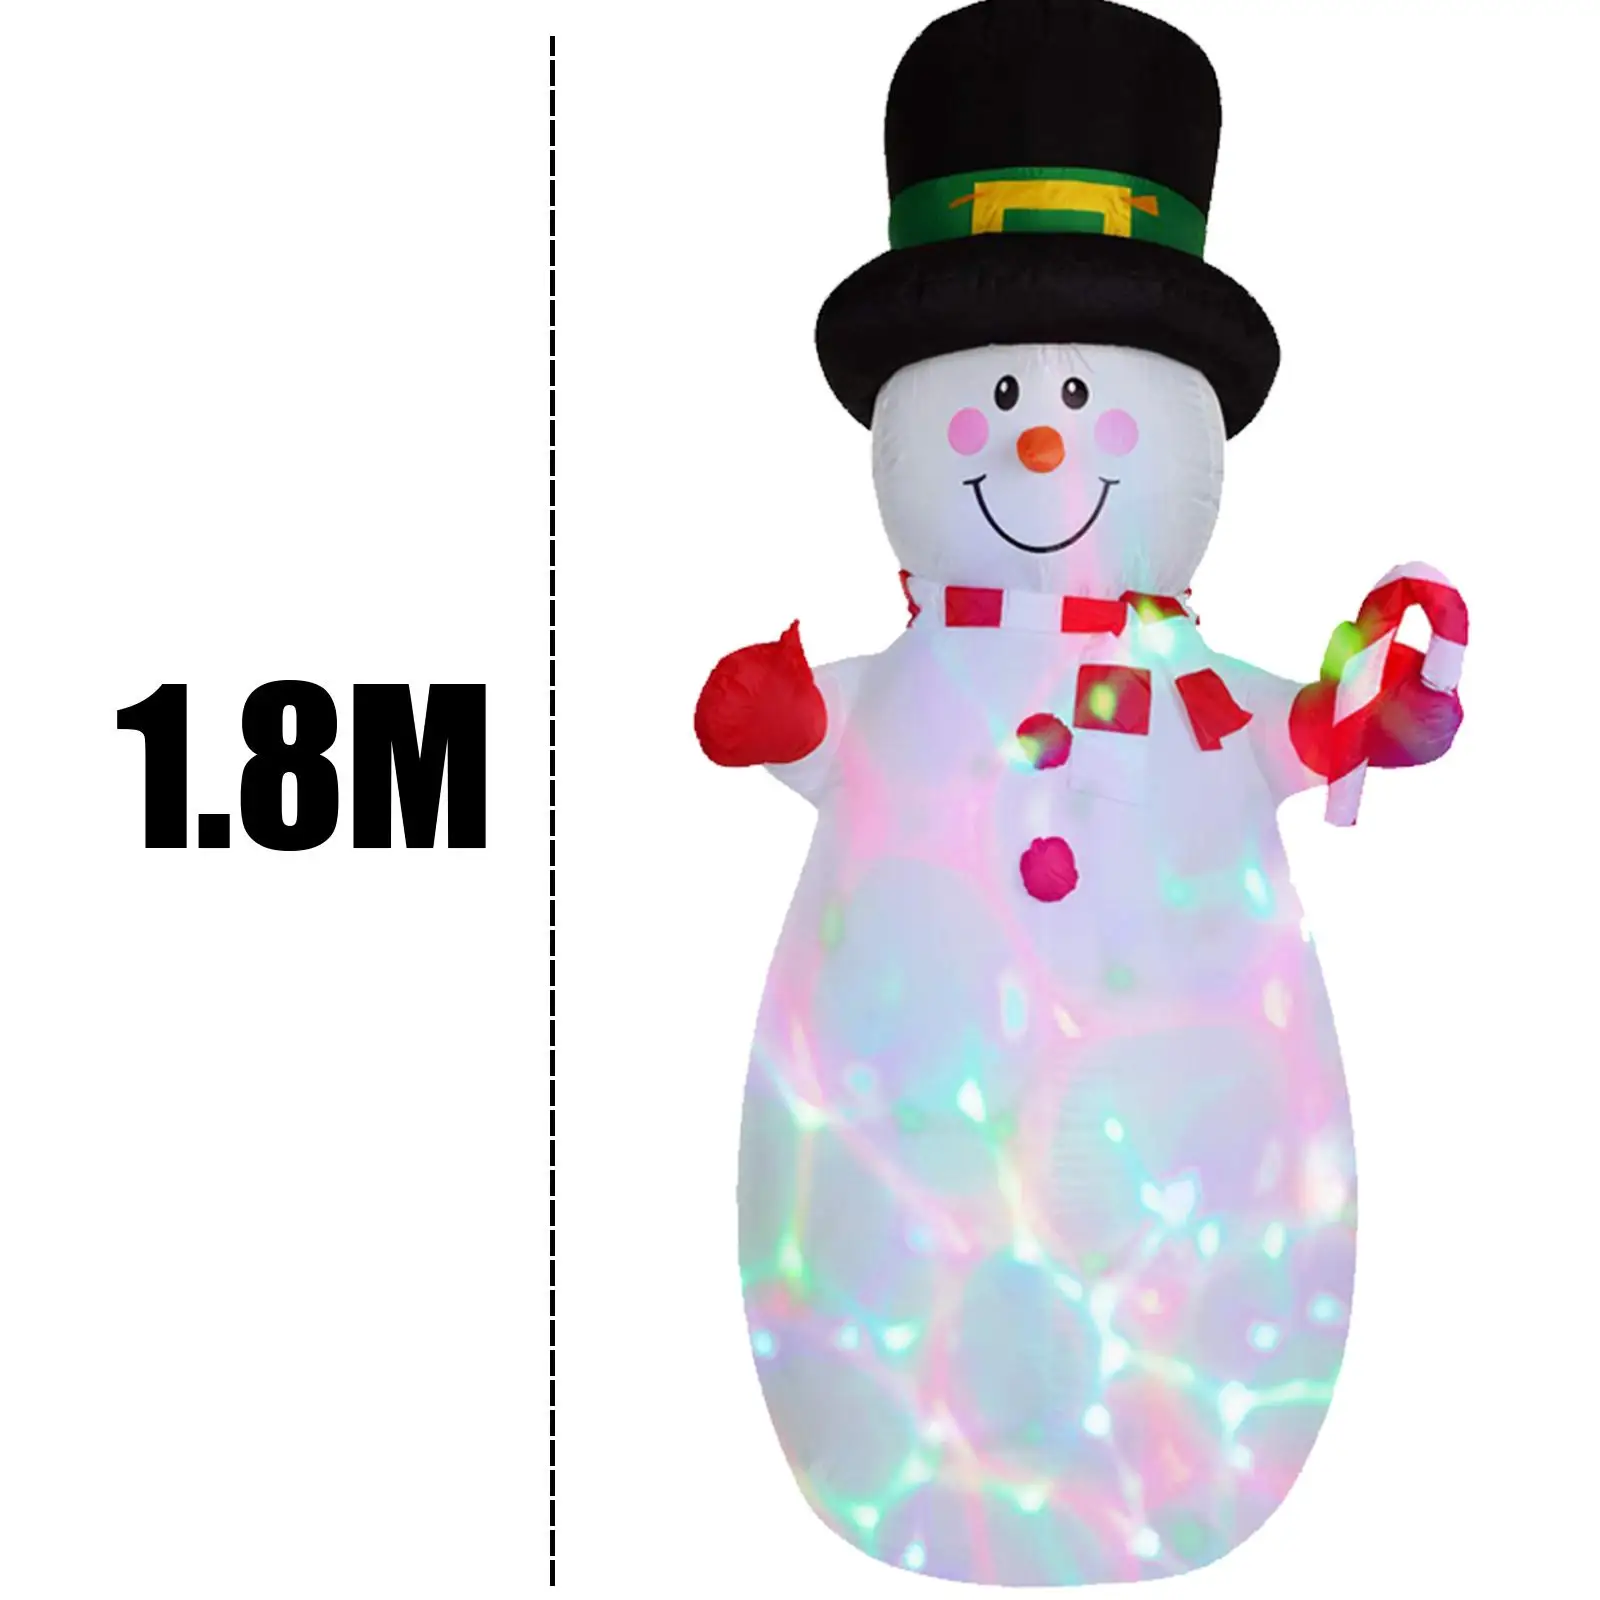 6ft Xmas Inflatable Snowman with Stakes Holiday Inflatable Snowman for Party Yard Garden Outdoor